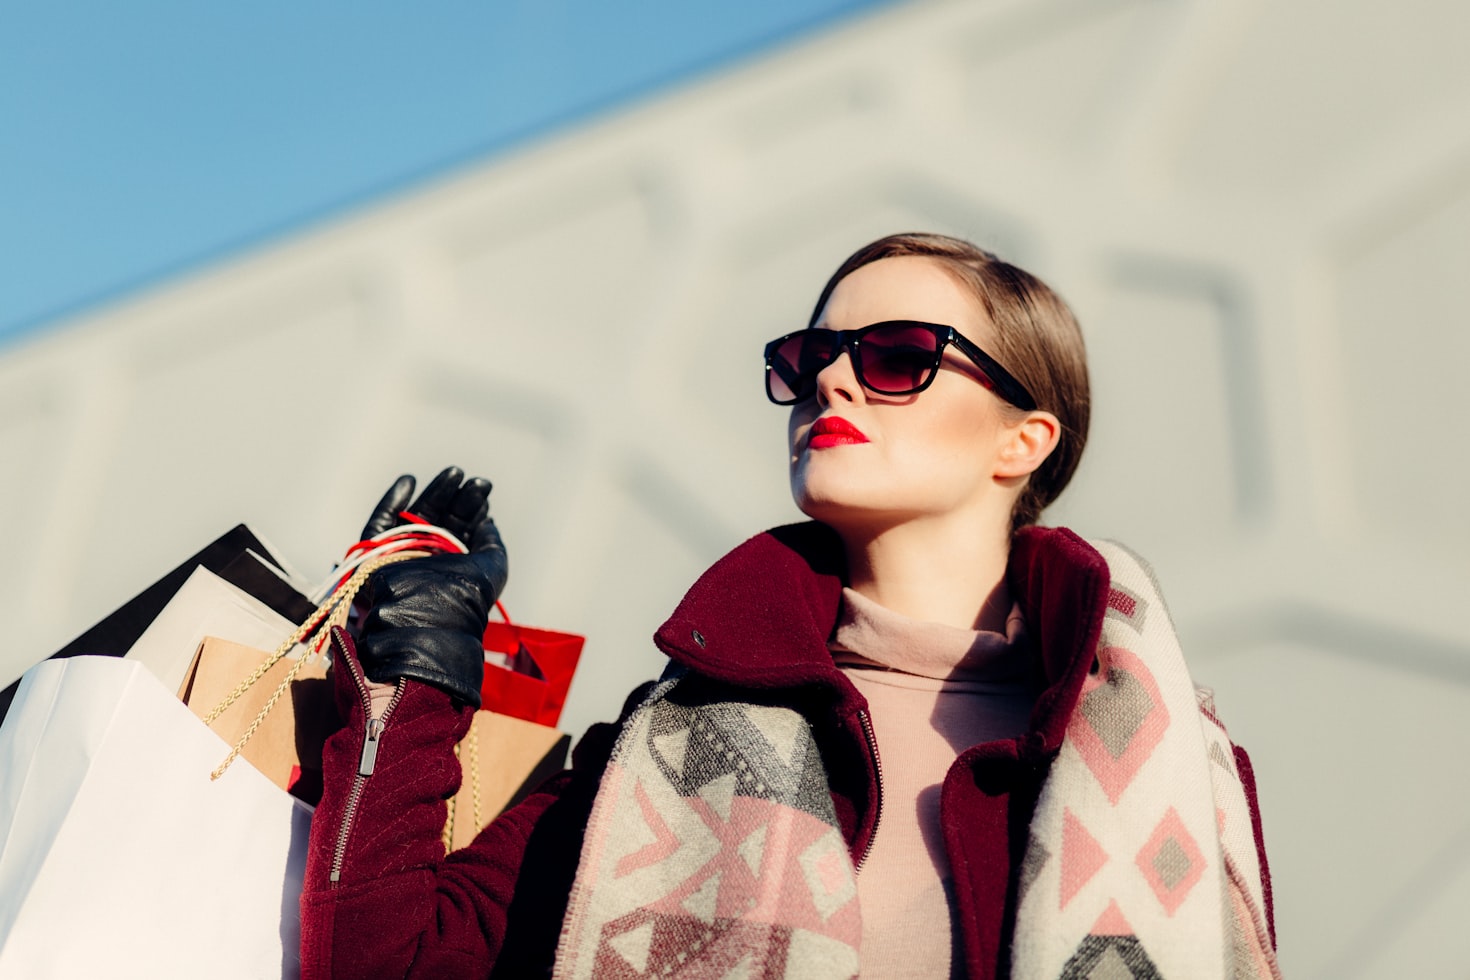 Woman wearing sunglasses, burgundy coat, and large scarf holds a bunch of shopping bags while looking up. Remember that a global work and travel abroad experience usually does not mean making a ton of money!